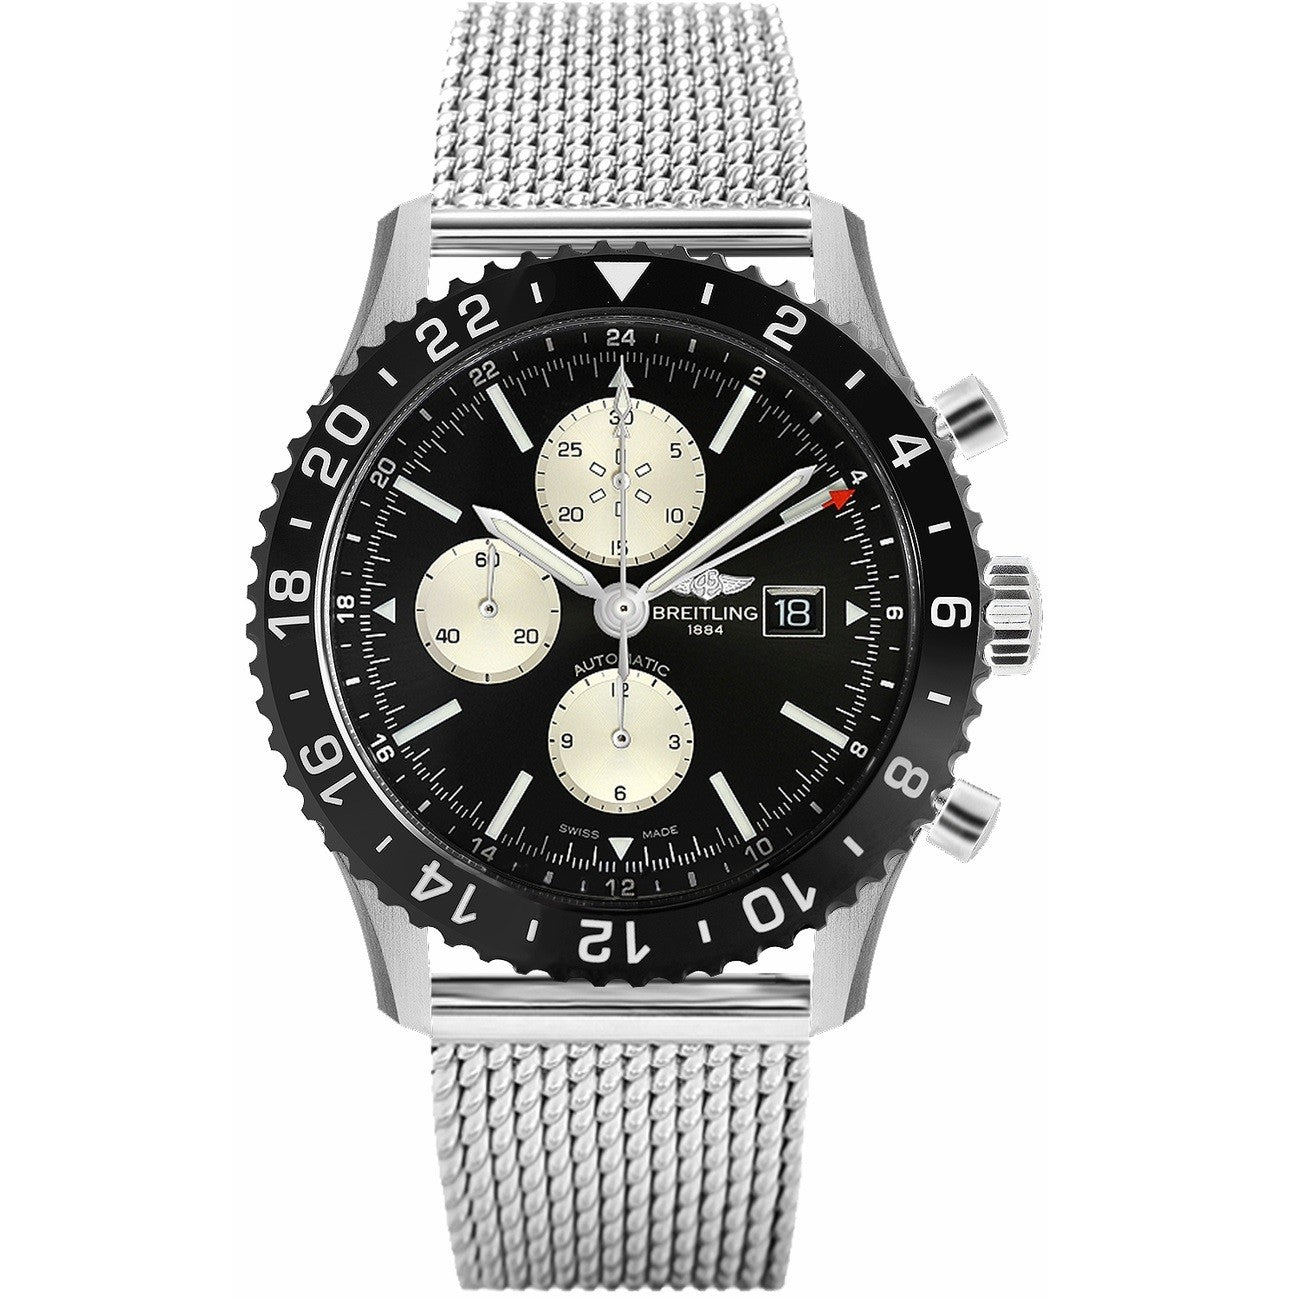 BREITLING Chronoliner Mens Watch Y2431012/BE10 152A